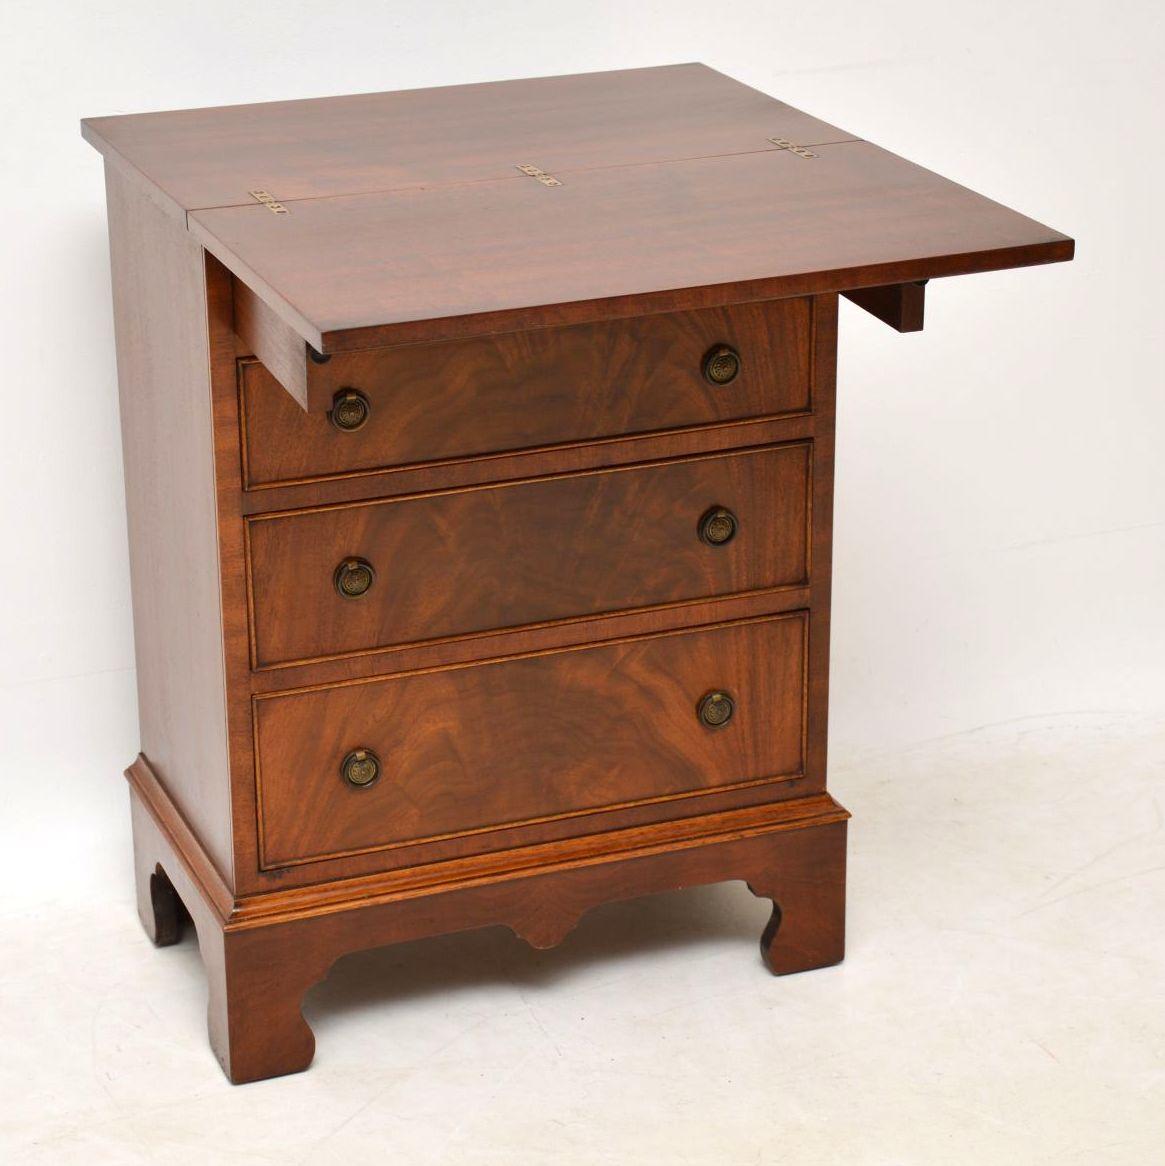 Small proportioned antique Georgian style mahogany bachelors chest on bracket feet, in good condition, having just been French polished. Its flame mahogany on the top and drawer fronts, which have original brass handles and are graduated in depth.